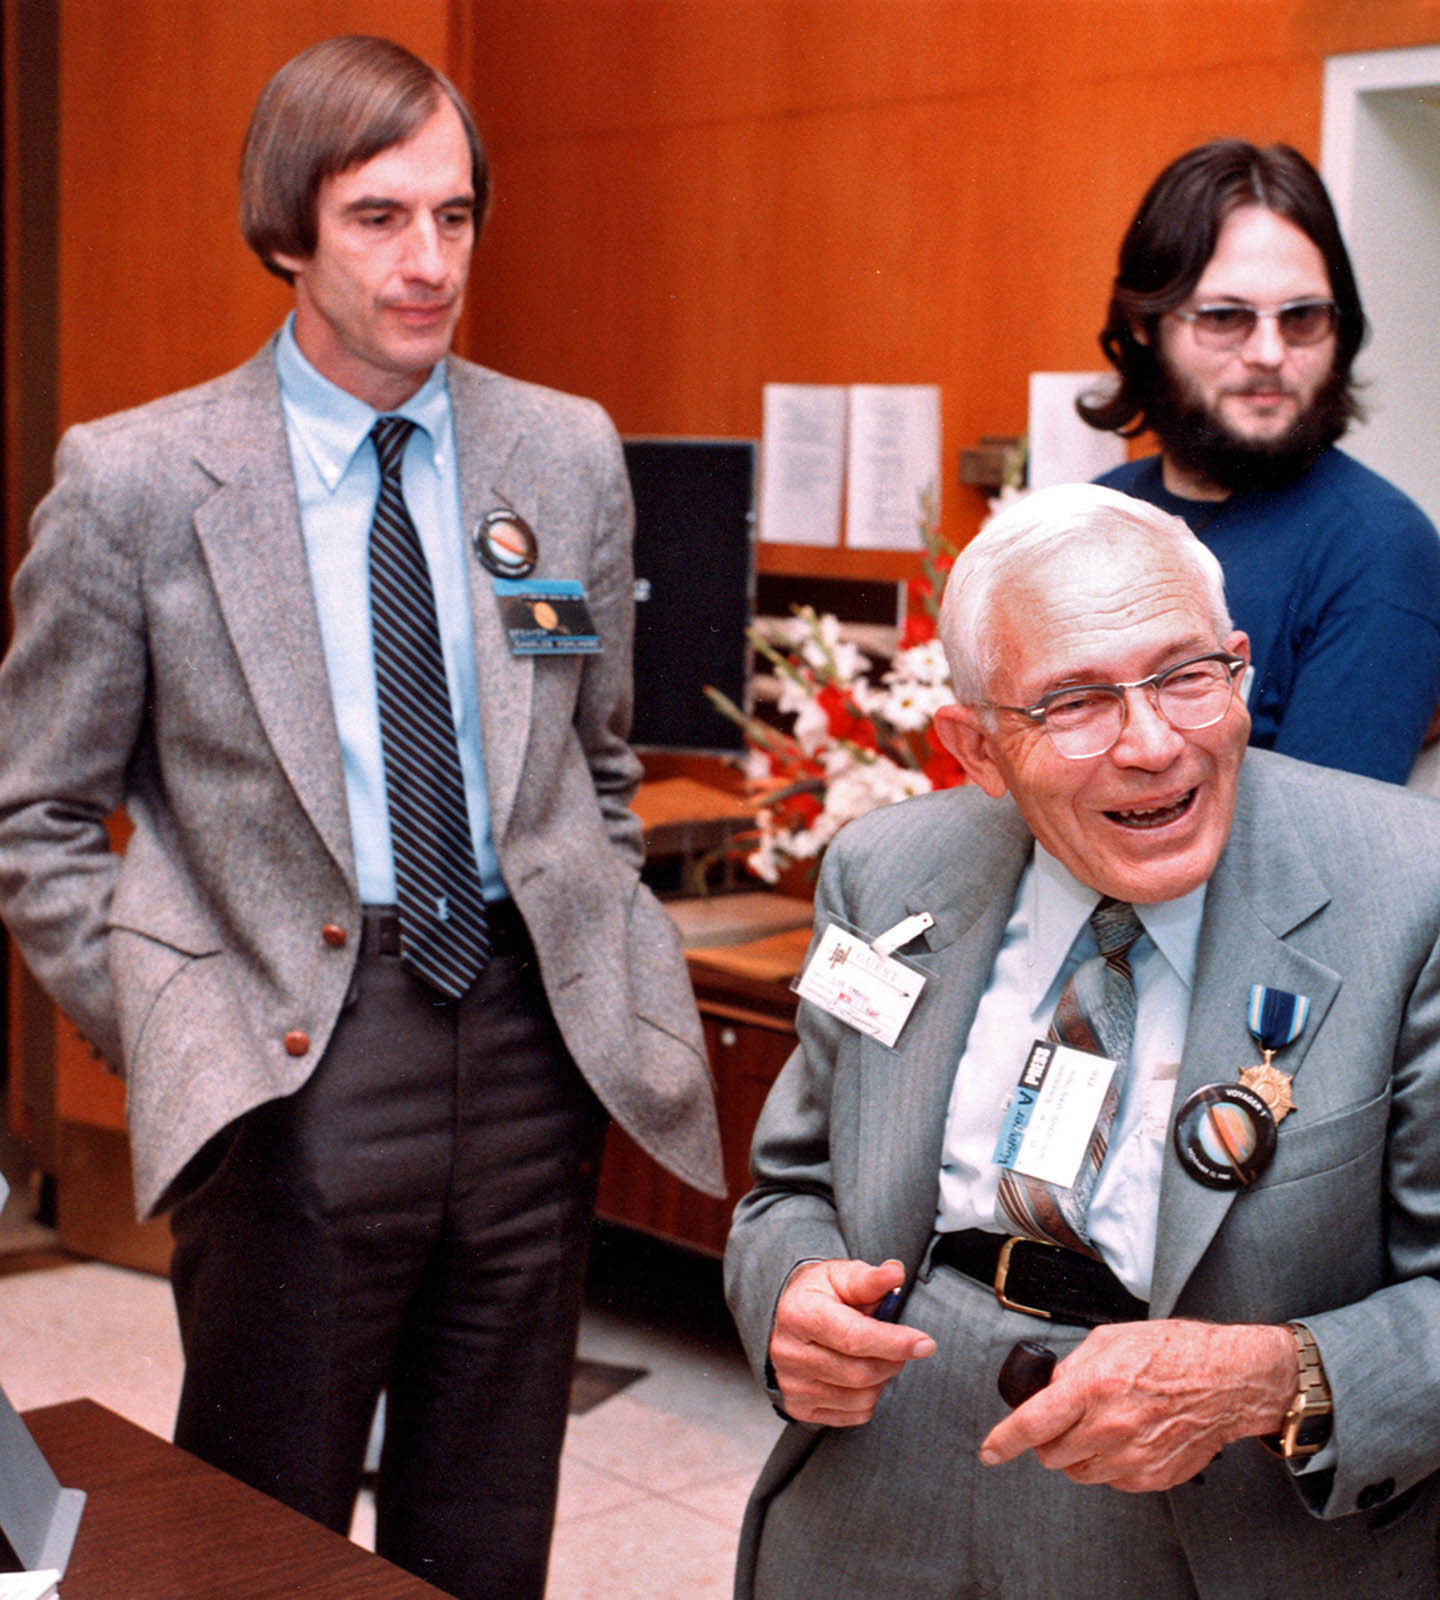 Kohlhase meets legendary astronomer, Clyde Tombaugh, discoverer of Pluto, at the Voyager Neptune encounter in August 1989. Credit: Charles Kohlhase